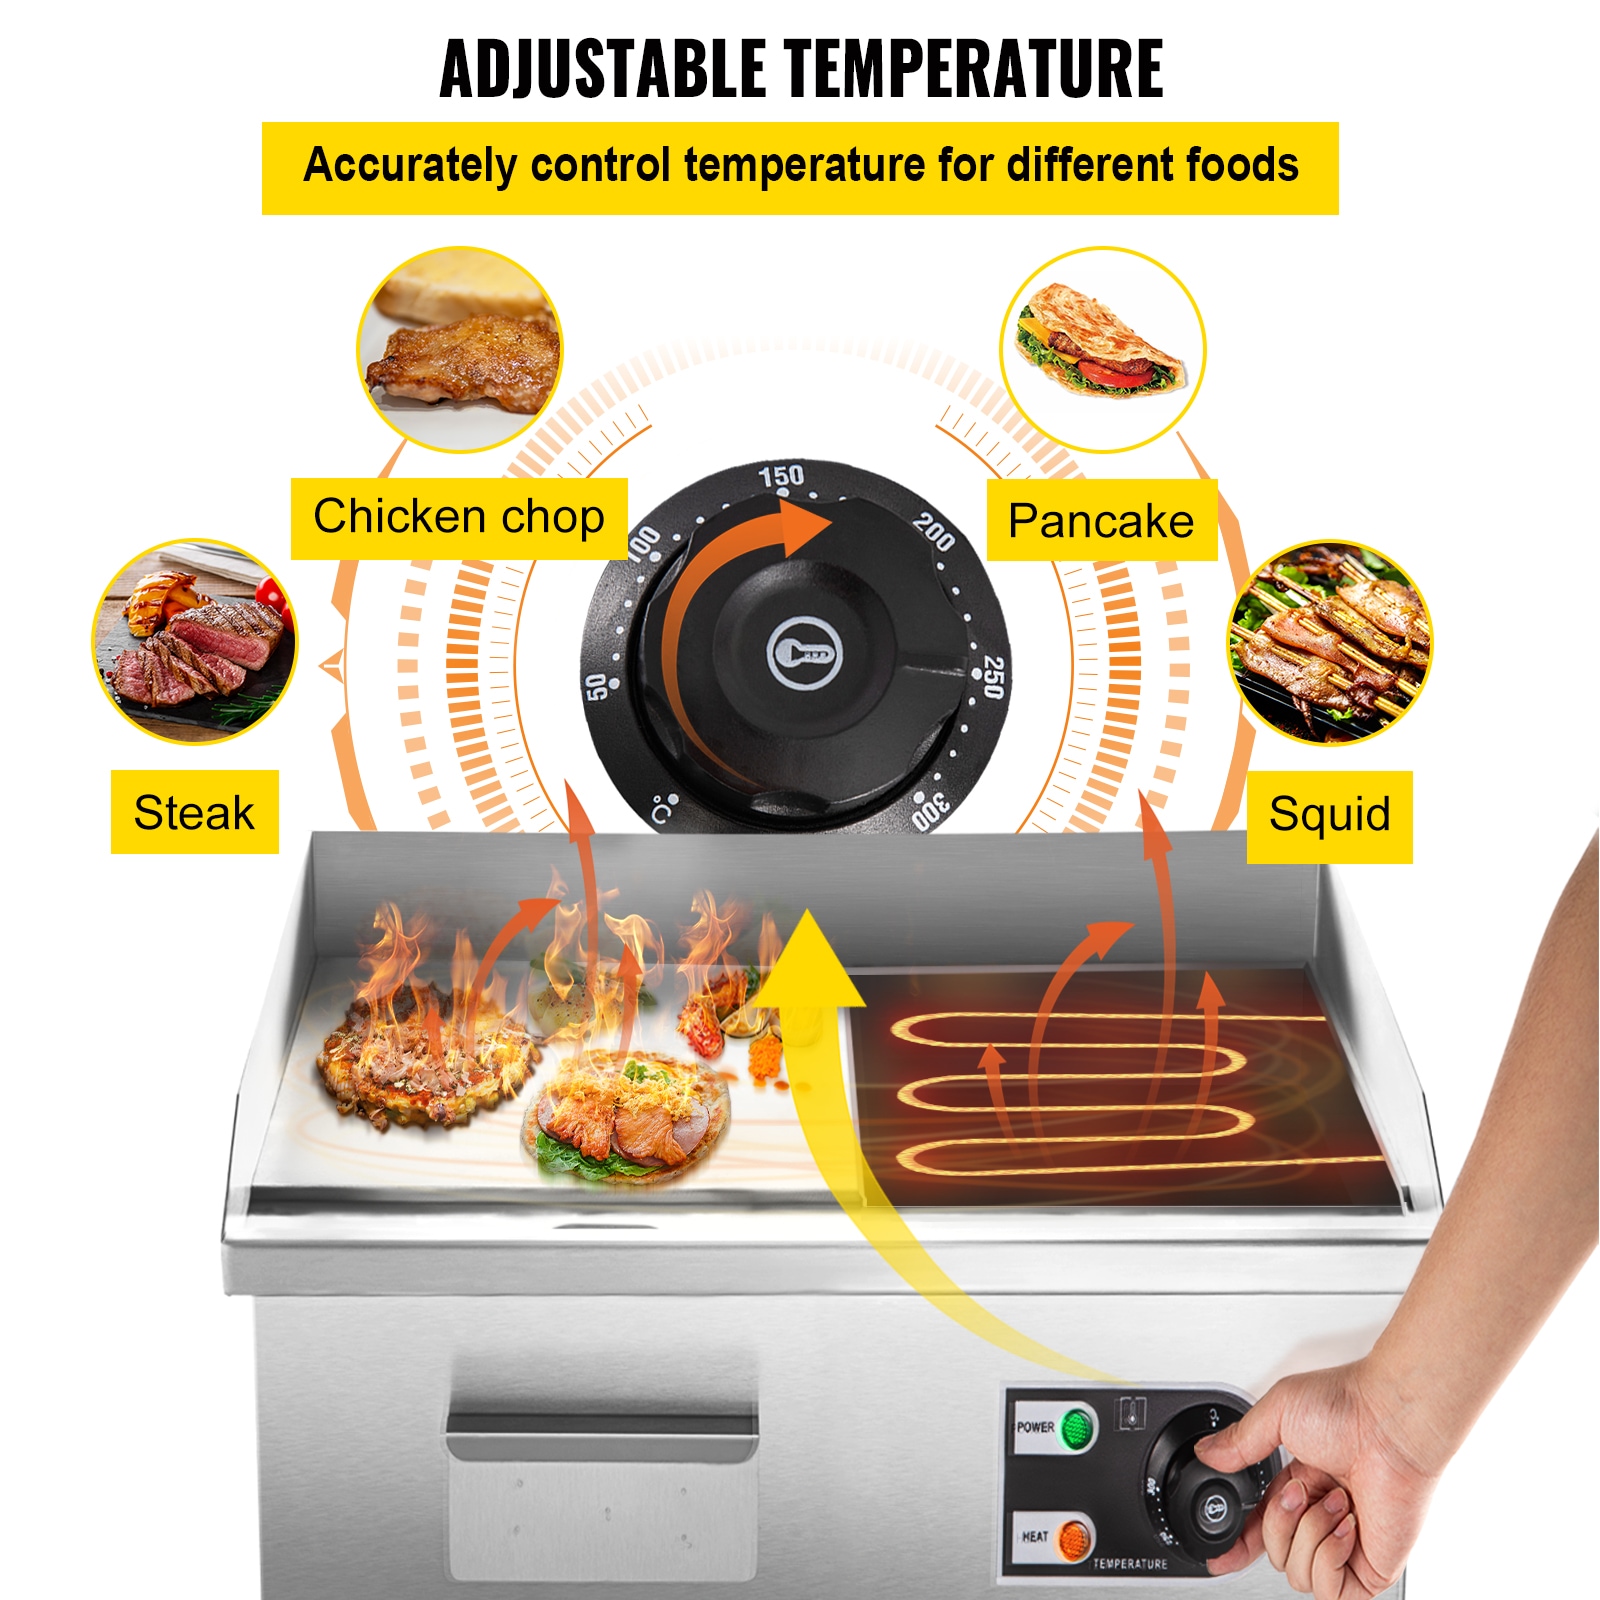  DASH Mini Maker Portable Grill Machine + Panini Press for  Gourmet Burgers, Sandwiches, Chicken + Other On the Go Breakfast, Lunch, or  Snacks with Recipe Guide - Black: Home & Kitchen